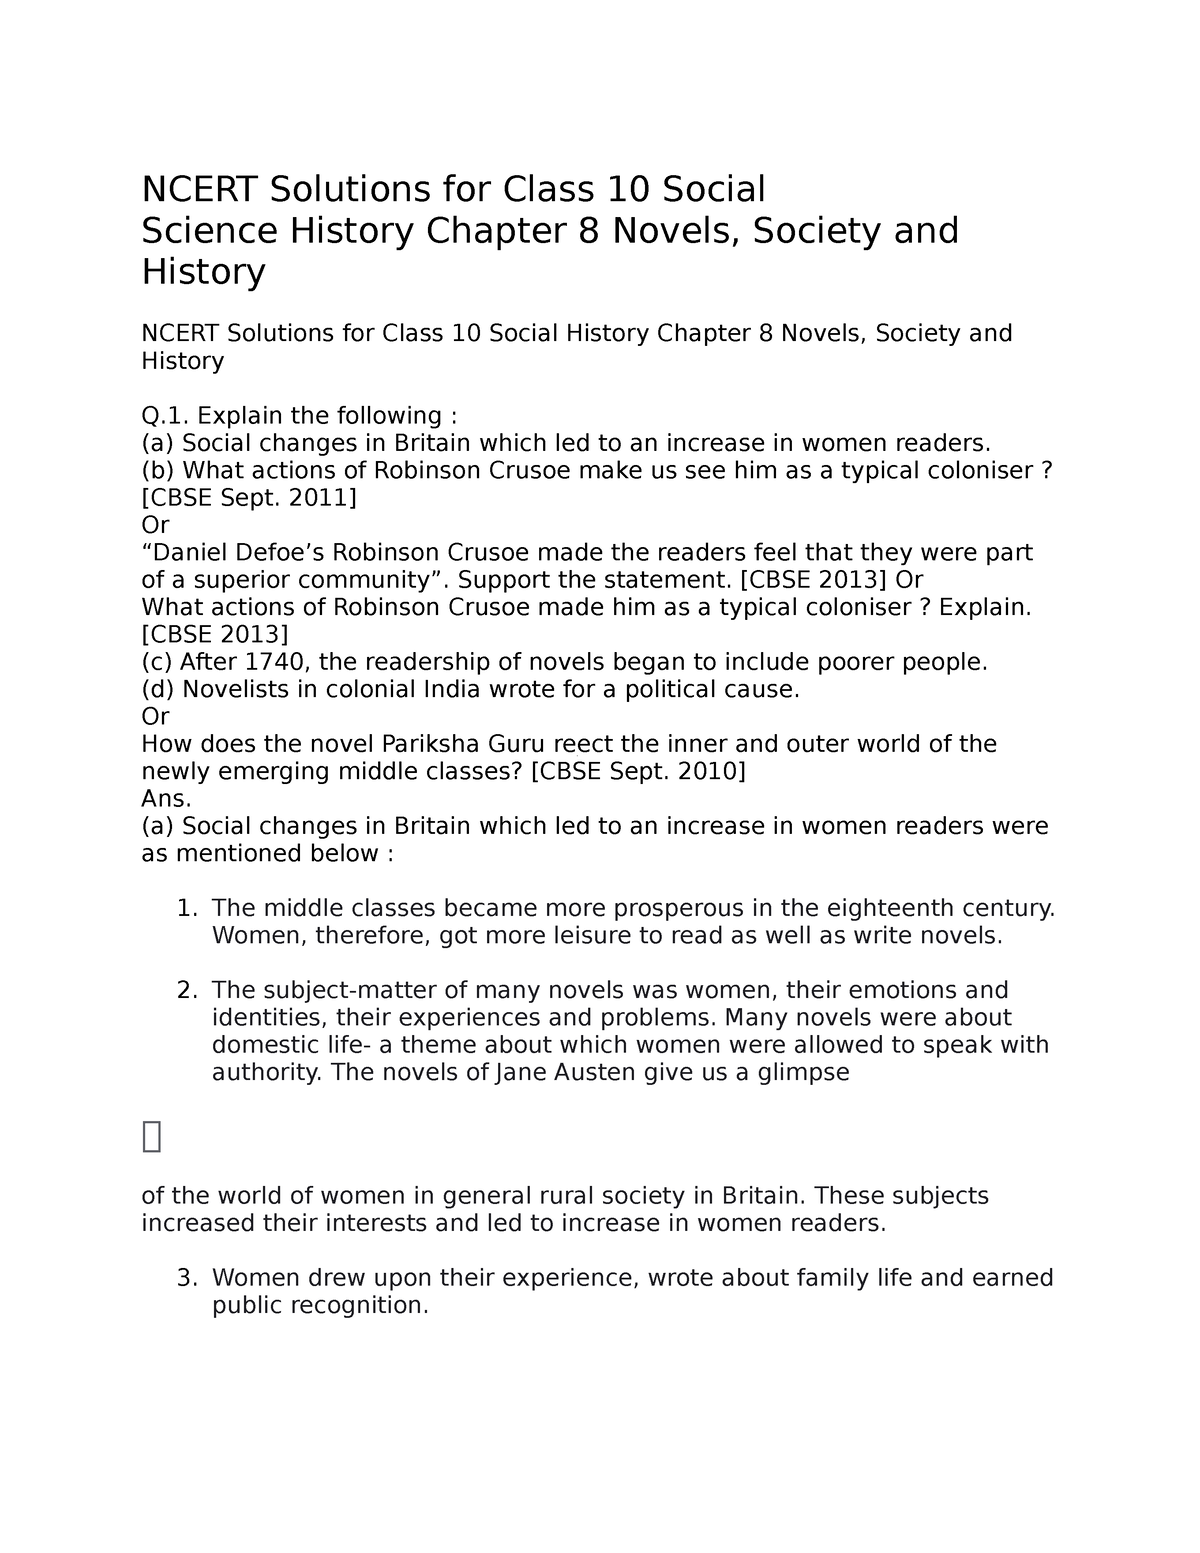 H8 Assignment 8 Ncert Solutions For Class 10 Social Science History Chapter 8 Novels Society 2801